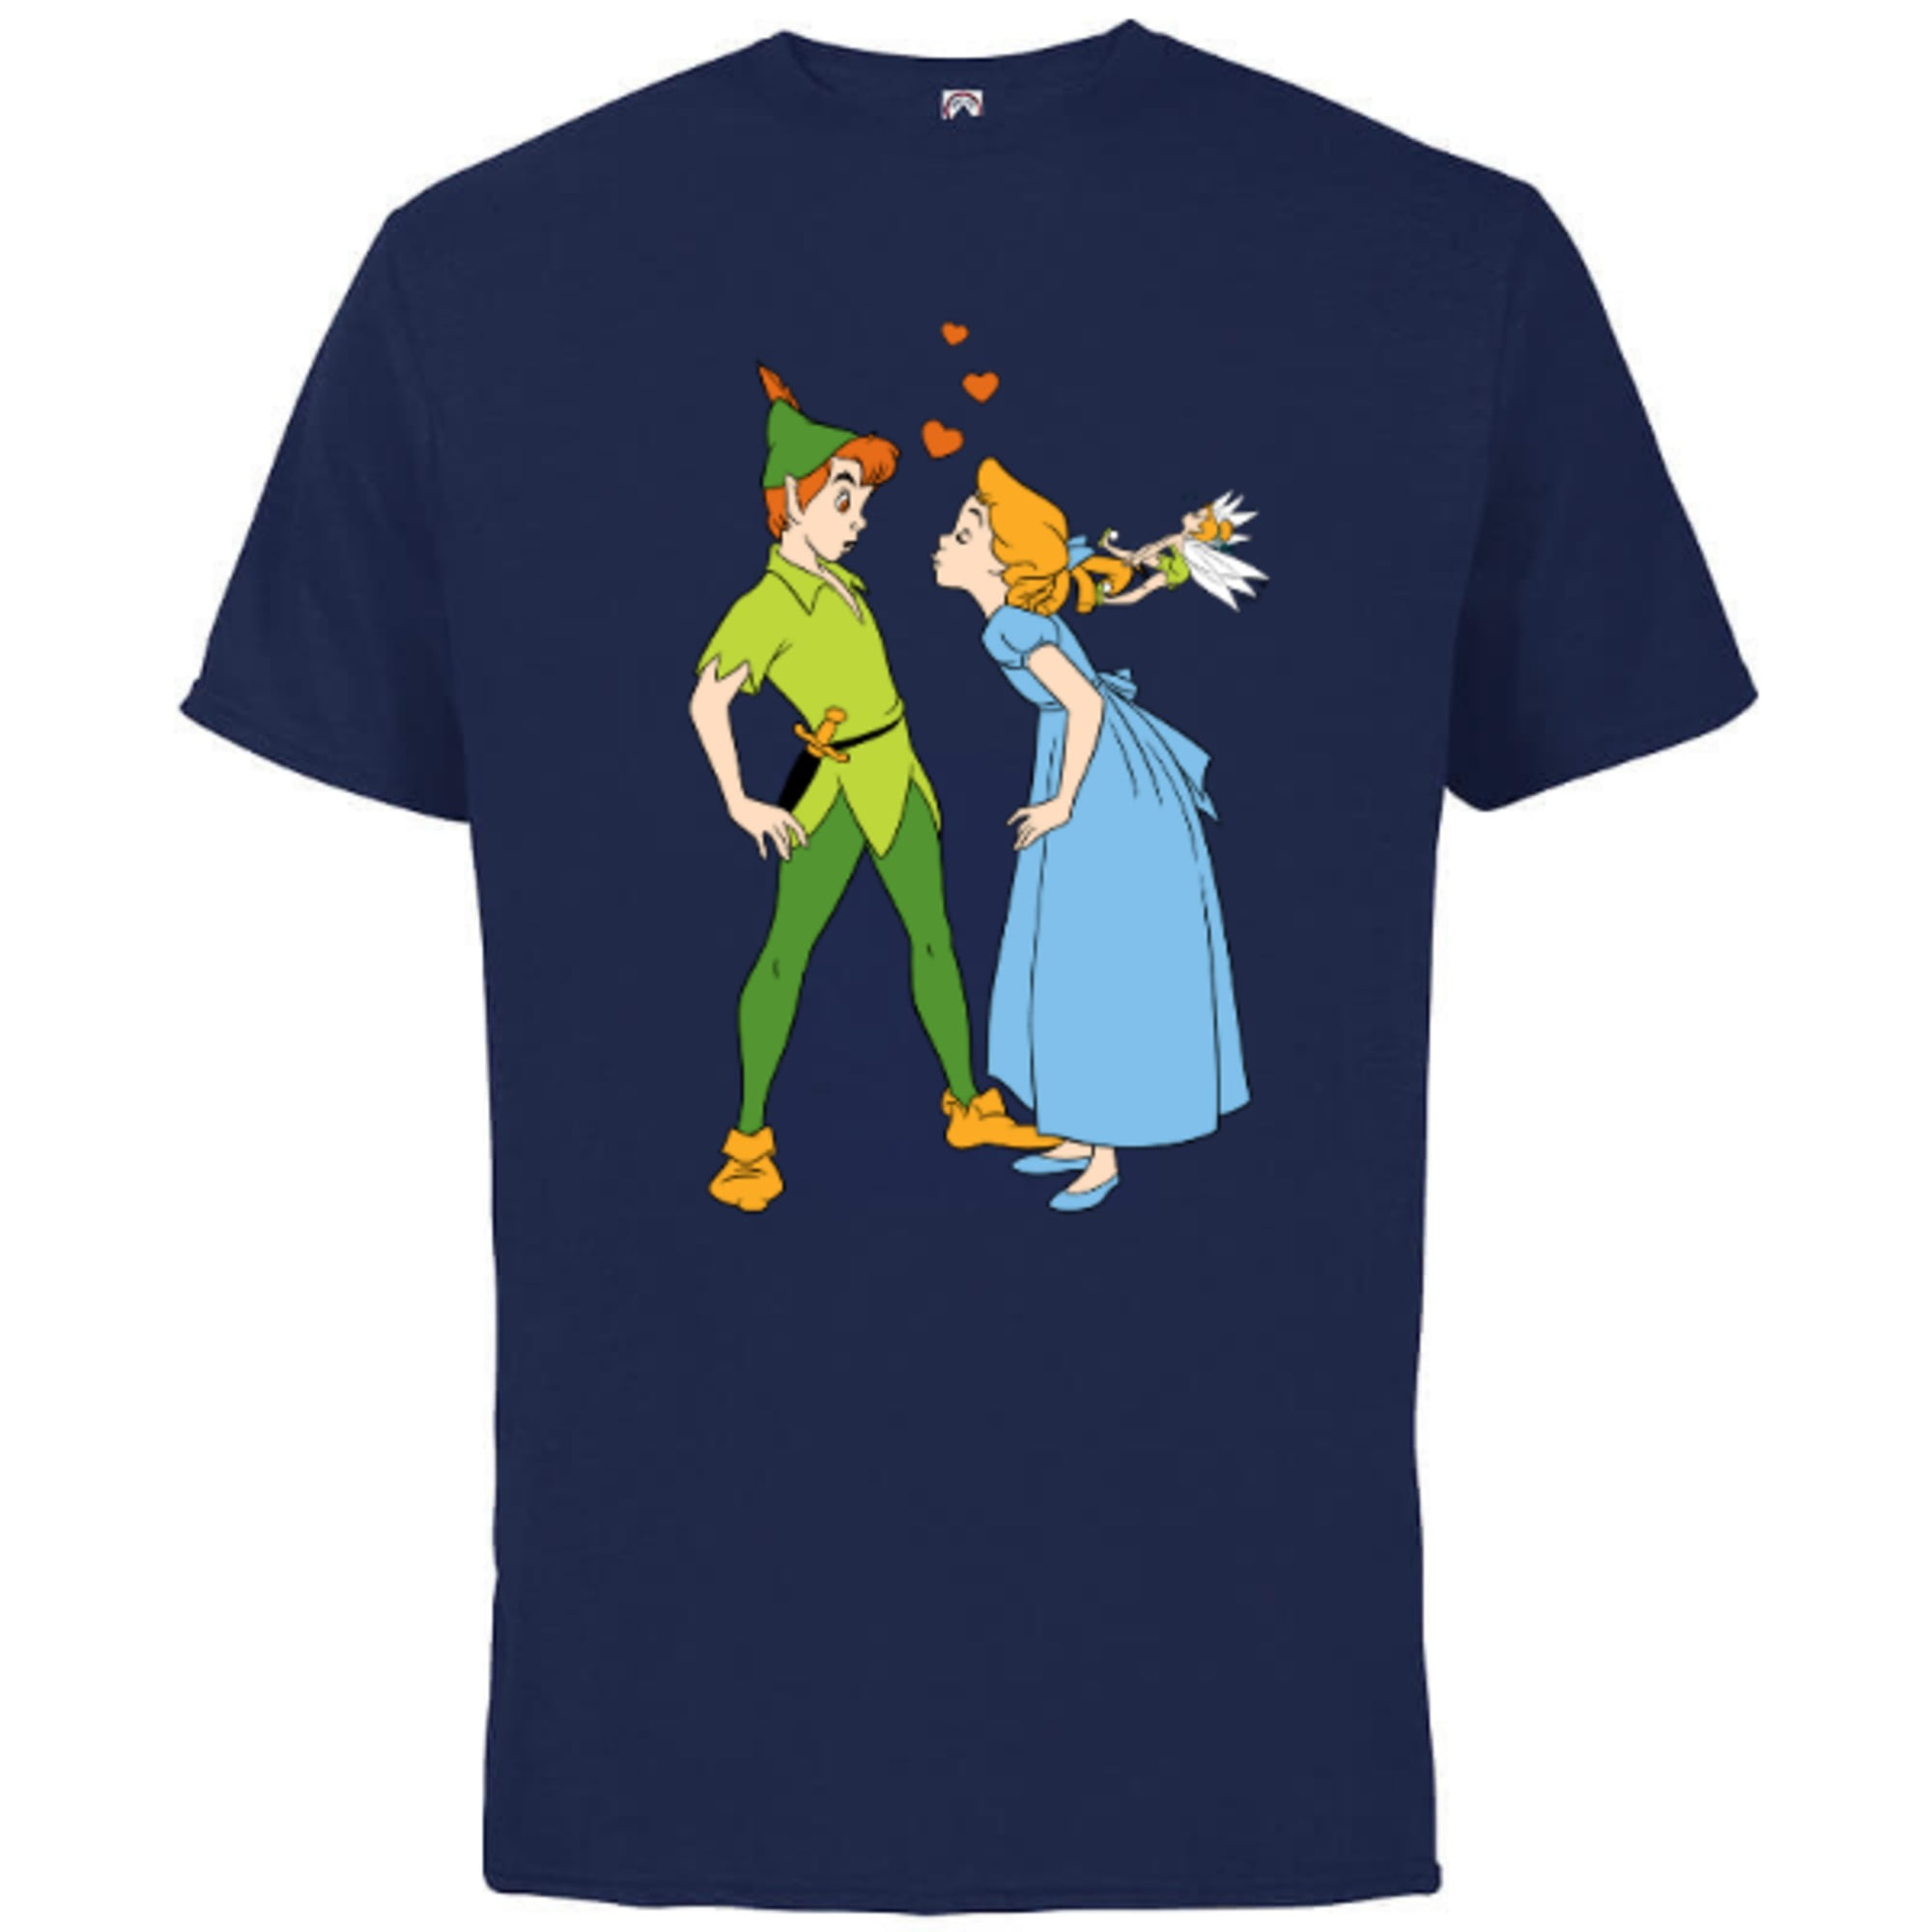 Disney Peter Pan and Wendy Darling Kiss Valentine's Day - Short Sleeve  Cotton T-Shirt for Adults - Customized-Soft Pink